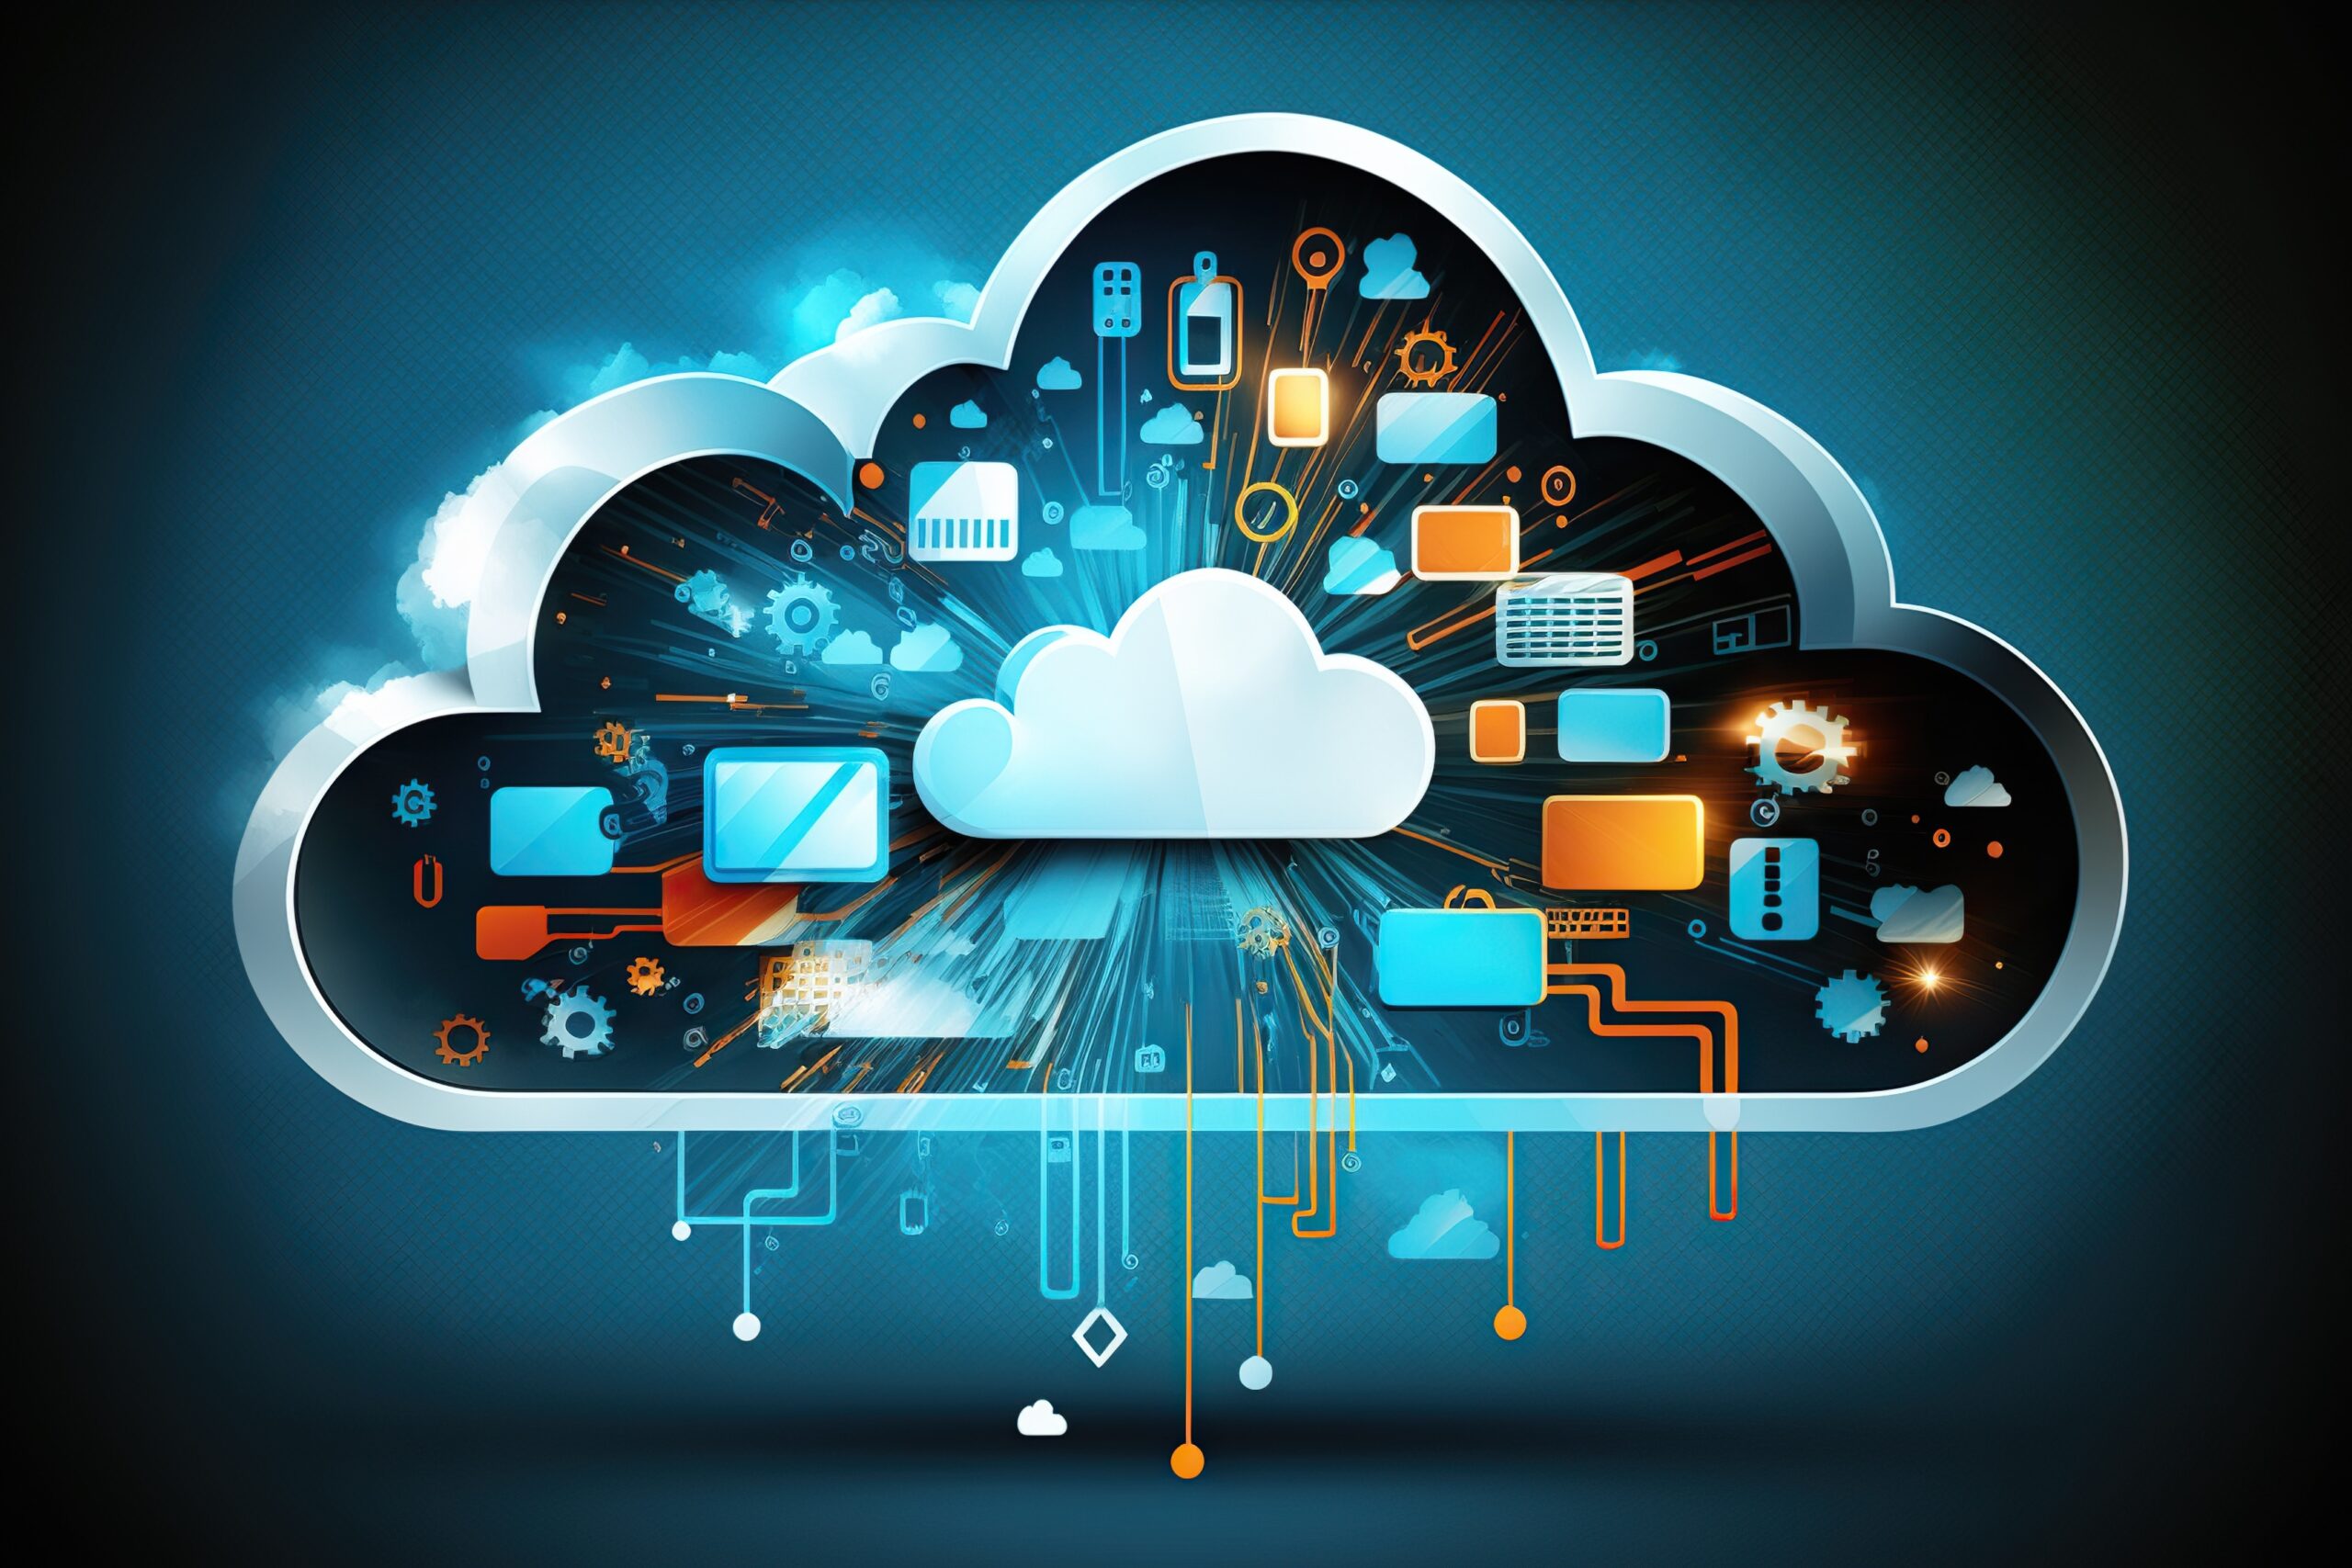 A digital illustration of a cloud with various technological icons and symbols representing cloud computing, scalability, and data processing. The cloud is illuminated, with rays of light emanating from it, symbolizing the distribution of data and resources.